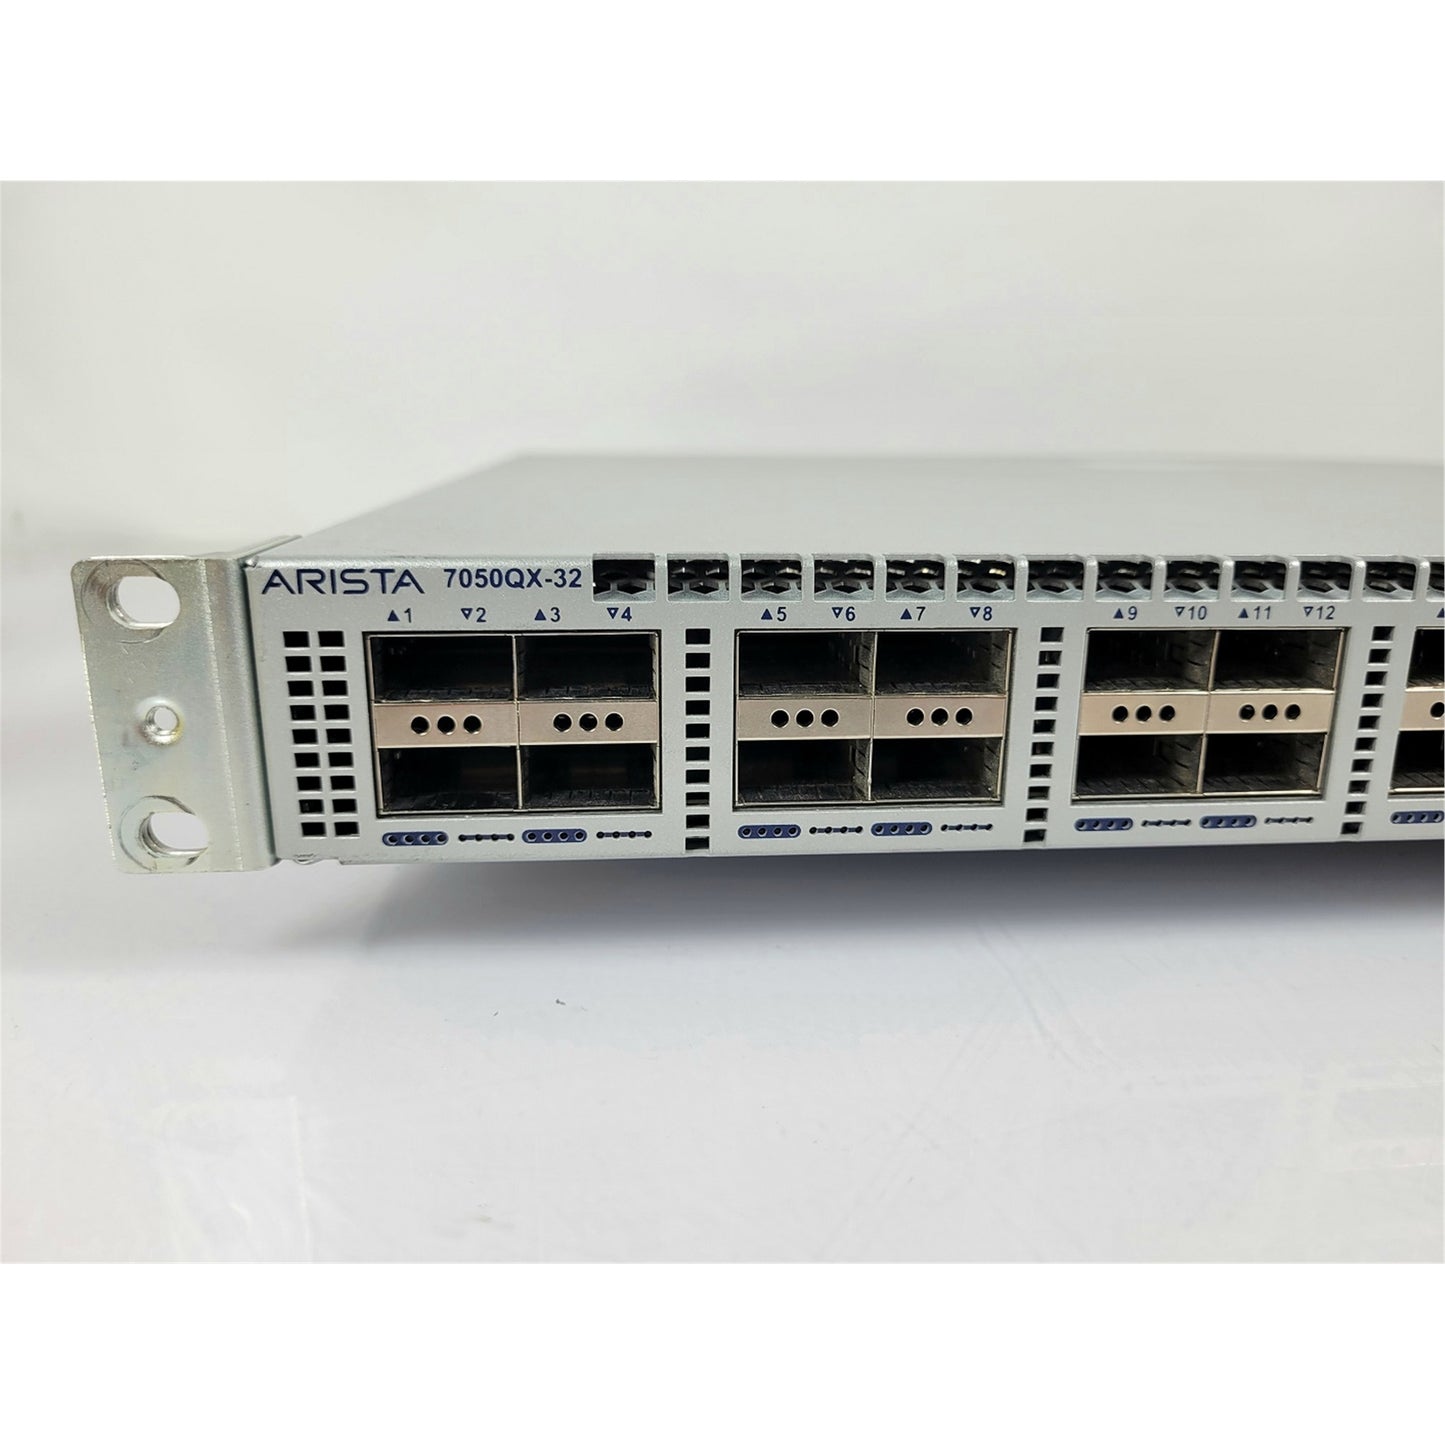 Arista DCS-7050QX-32, 32xQSFP+ & 4xSFP+ switch, chassis only (Used - Good)